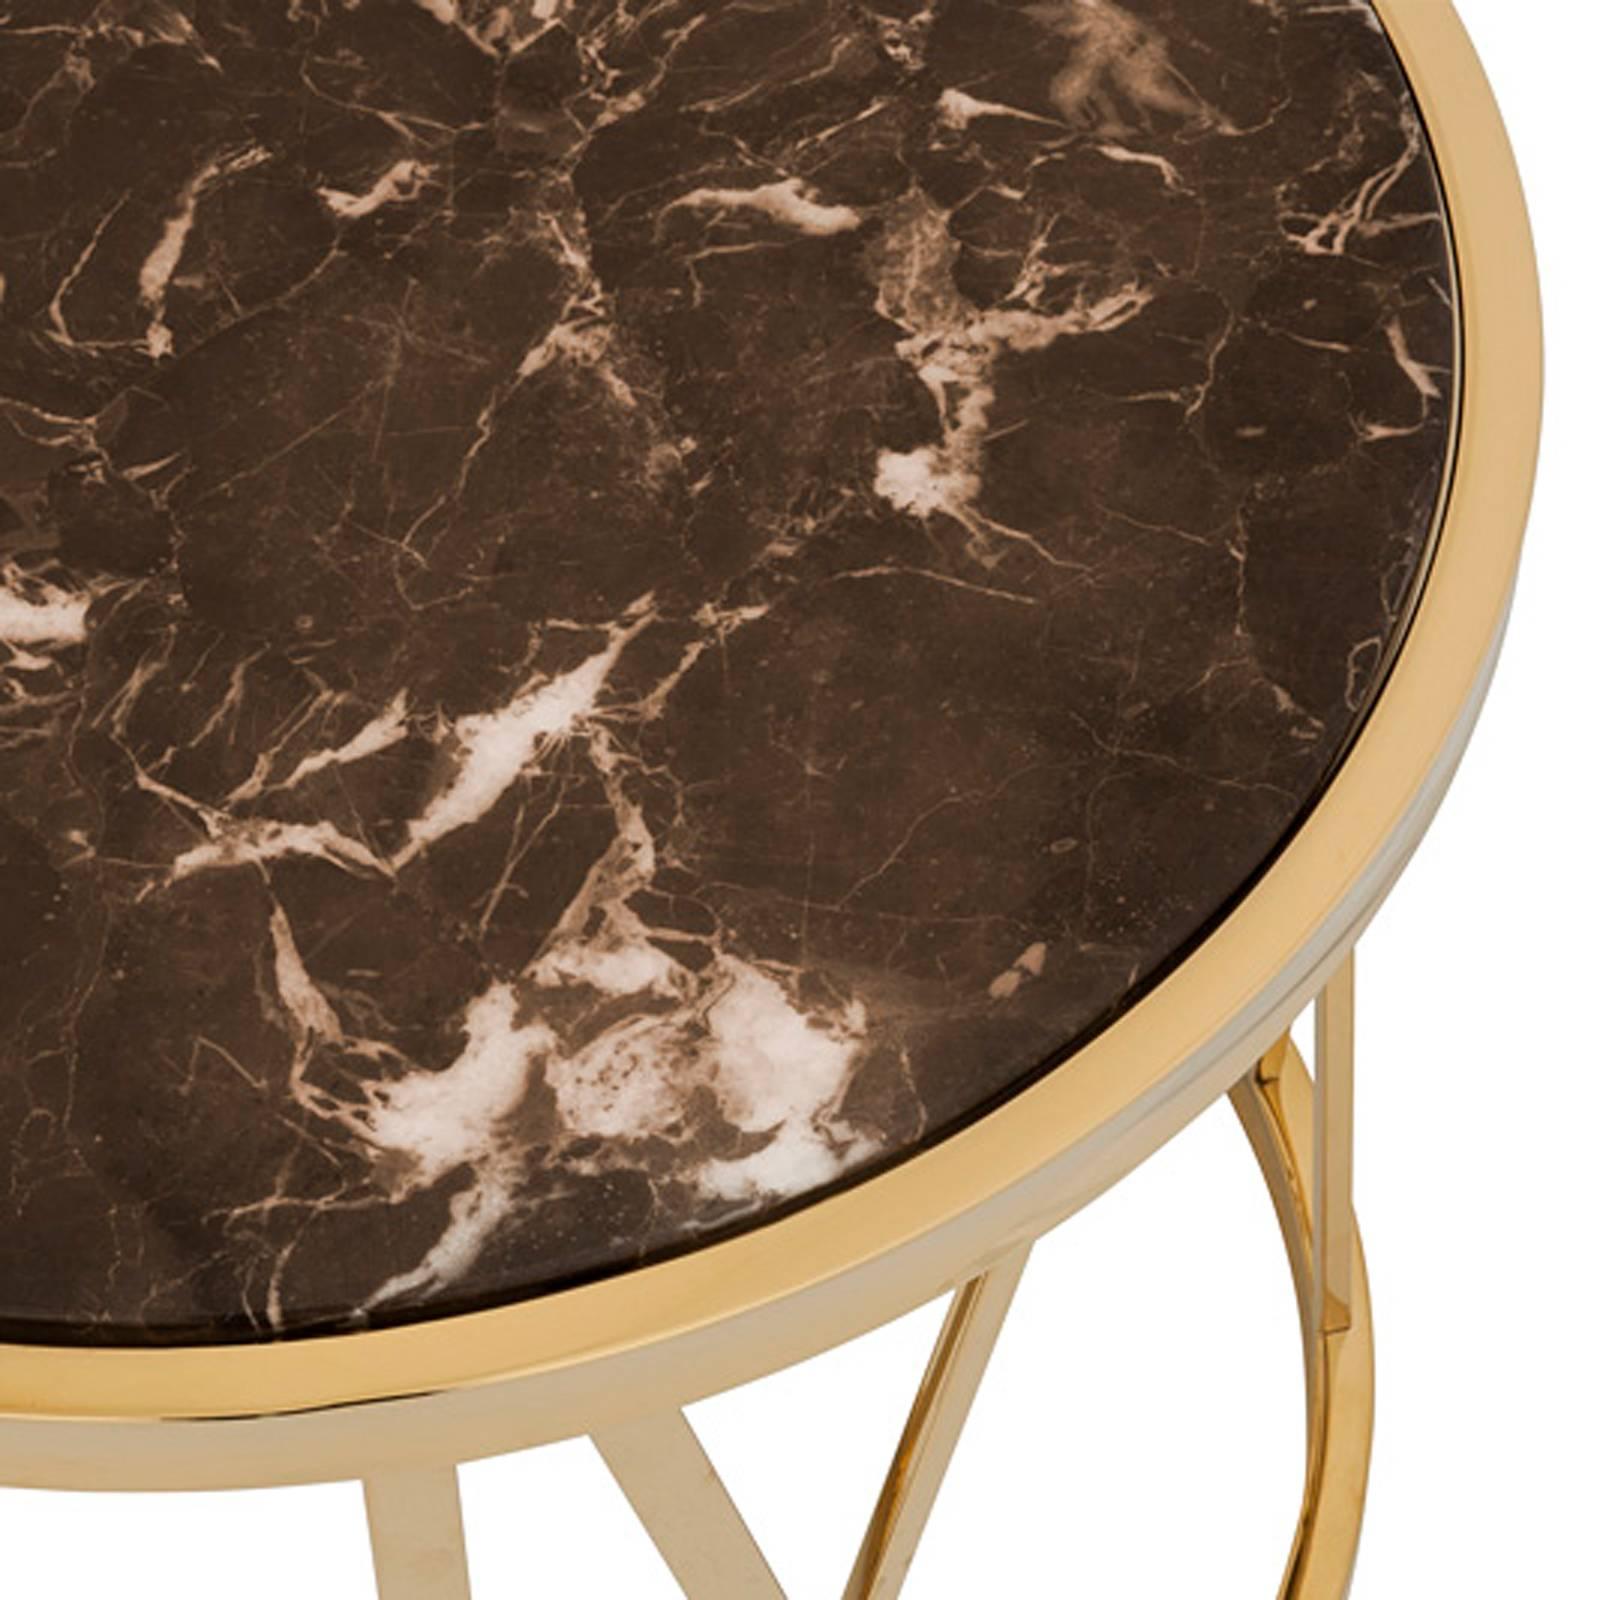 Side table Romain with gold finish structure made with
romain numbers. With brown marble top.
Also available in polished stainless steel with black marble
top and structure with roman numbers.
